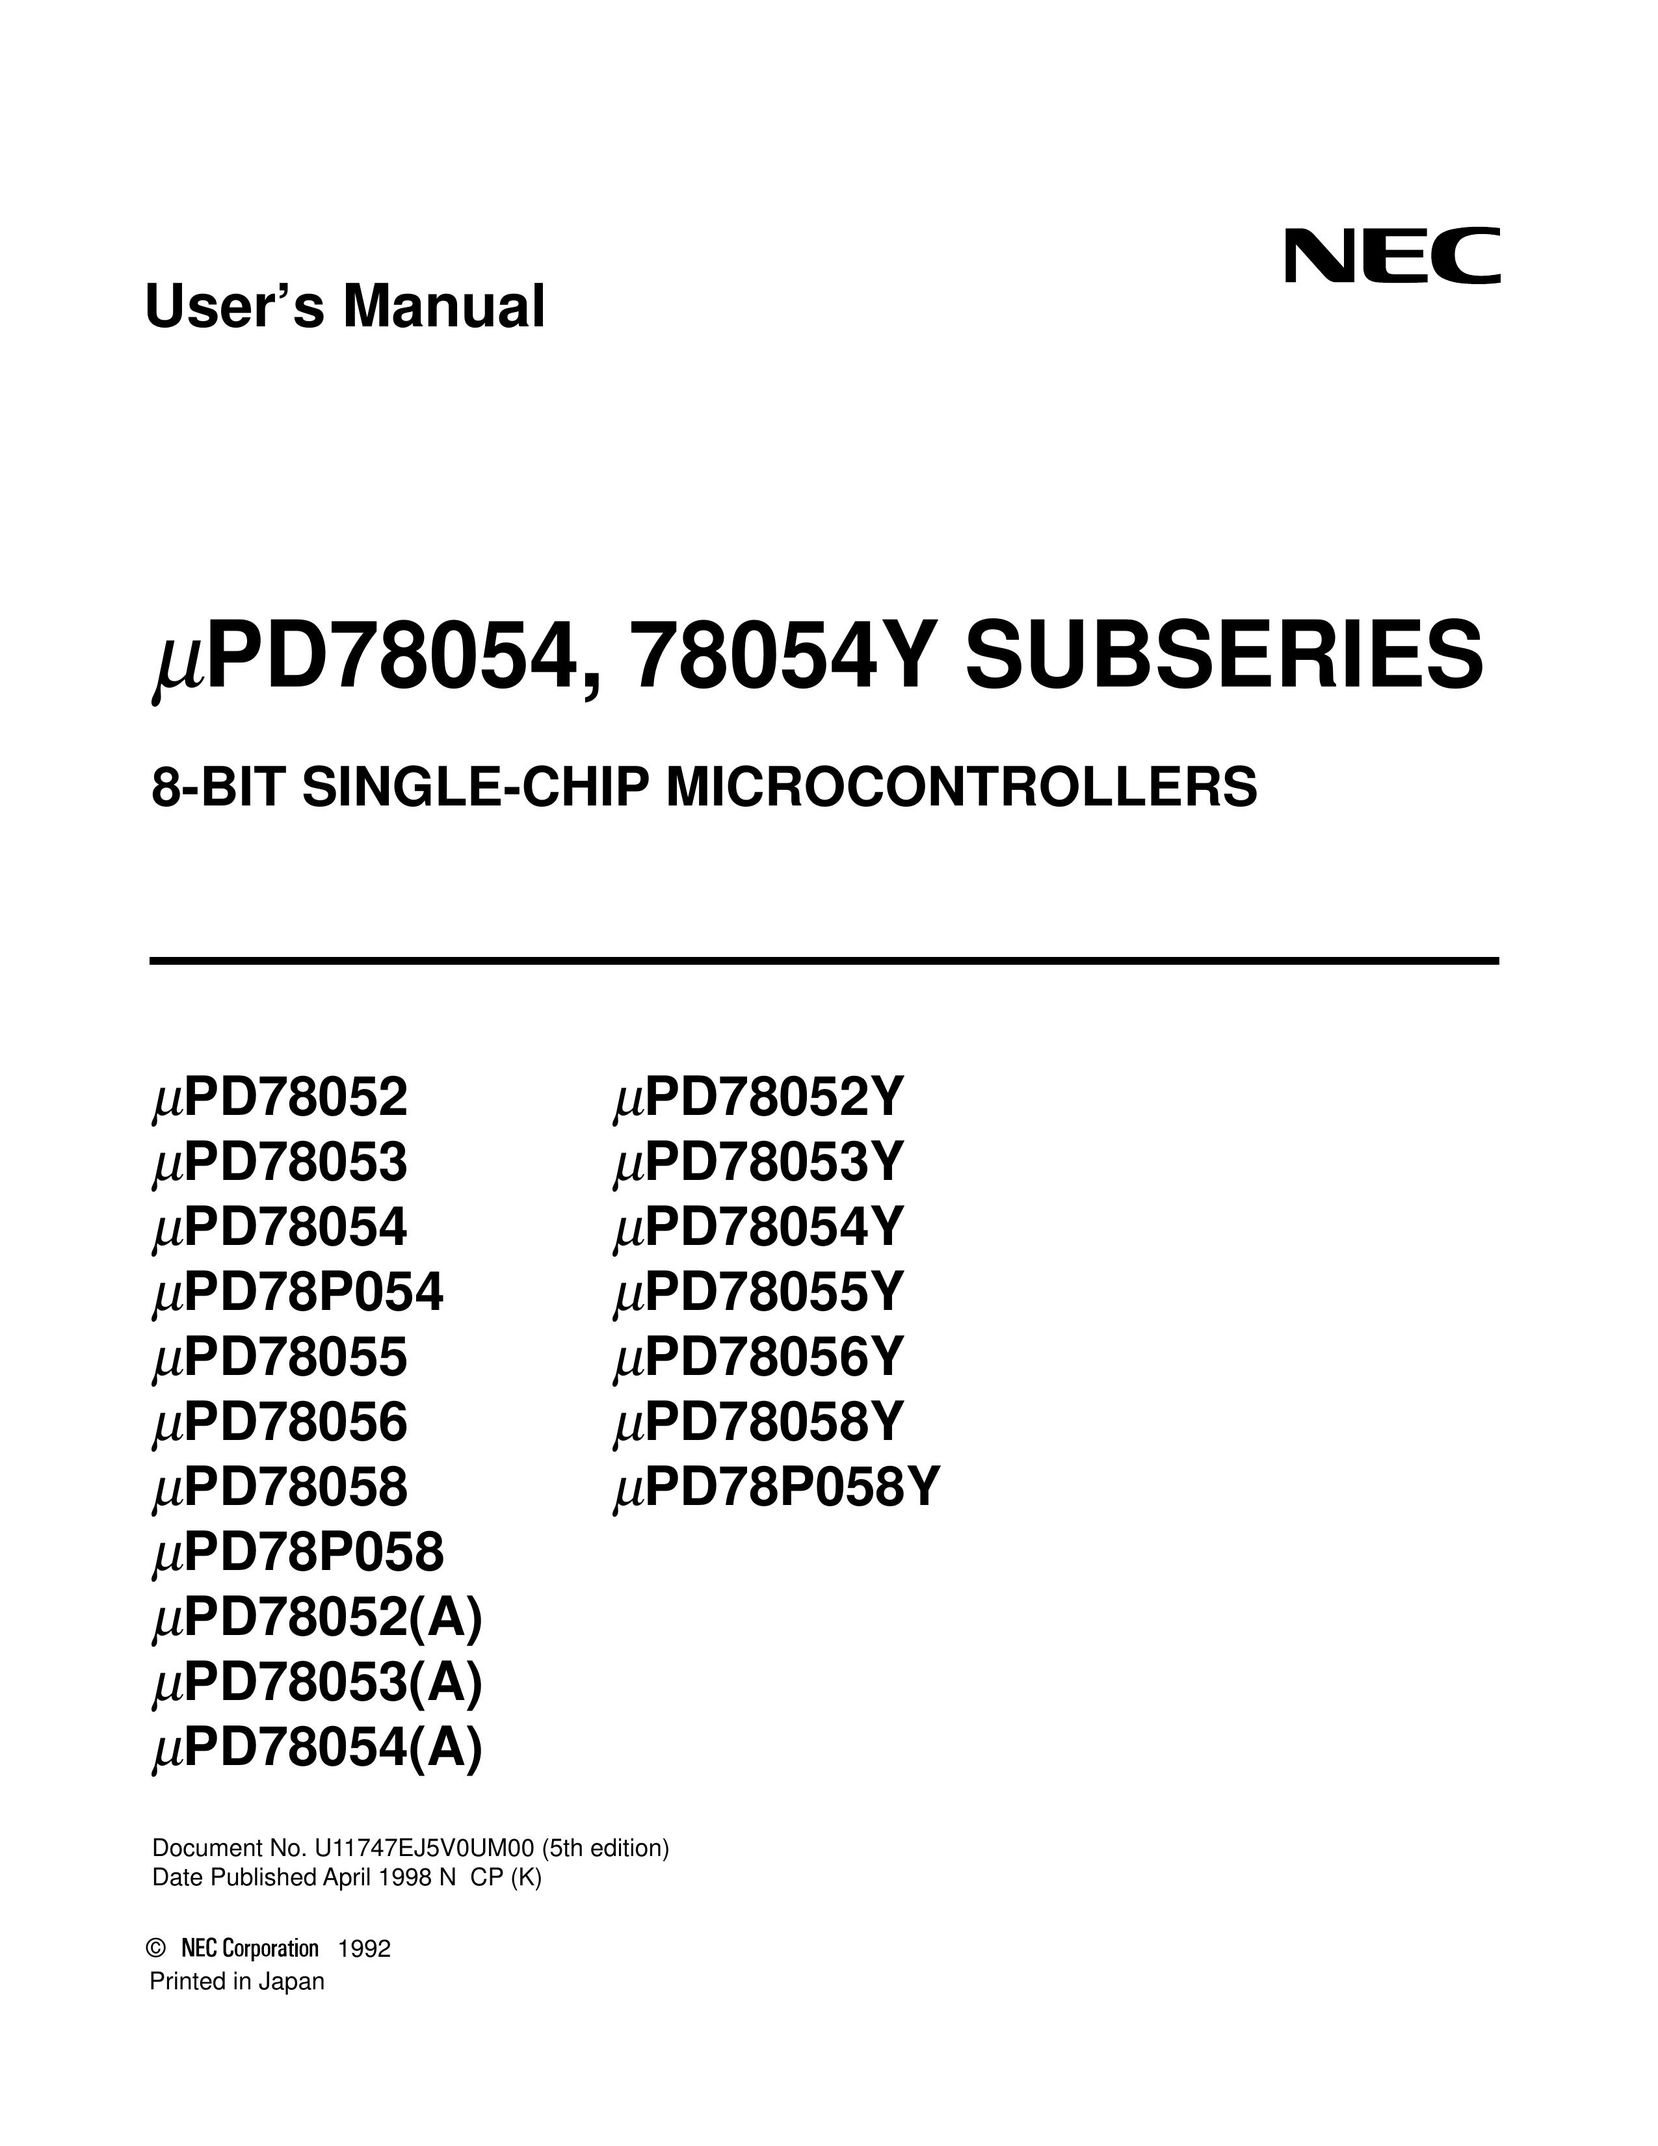 NEC uPD78054Y Network Card User Manual